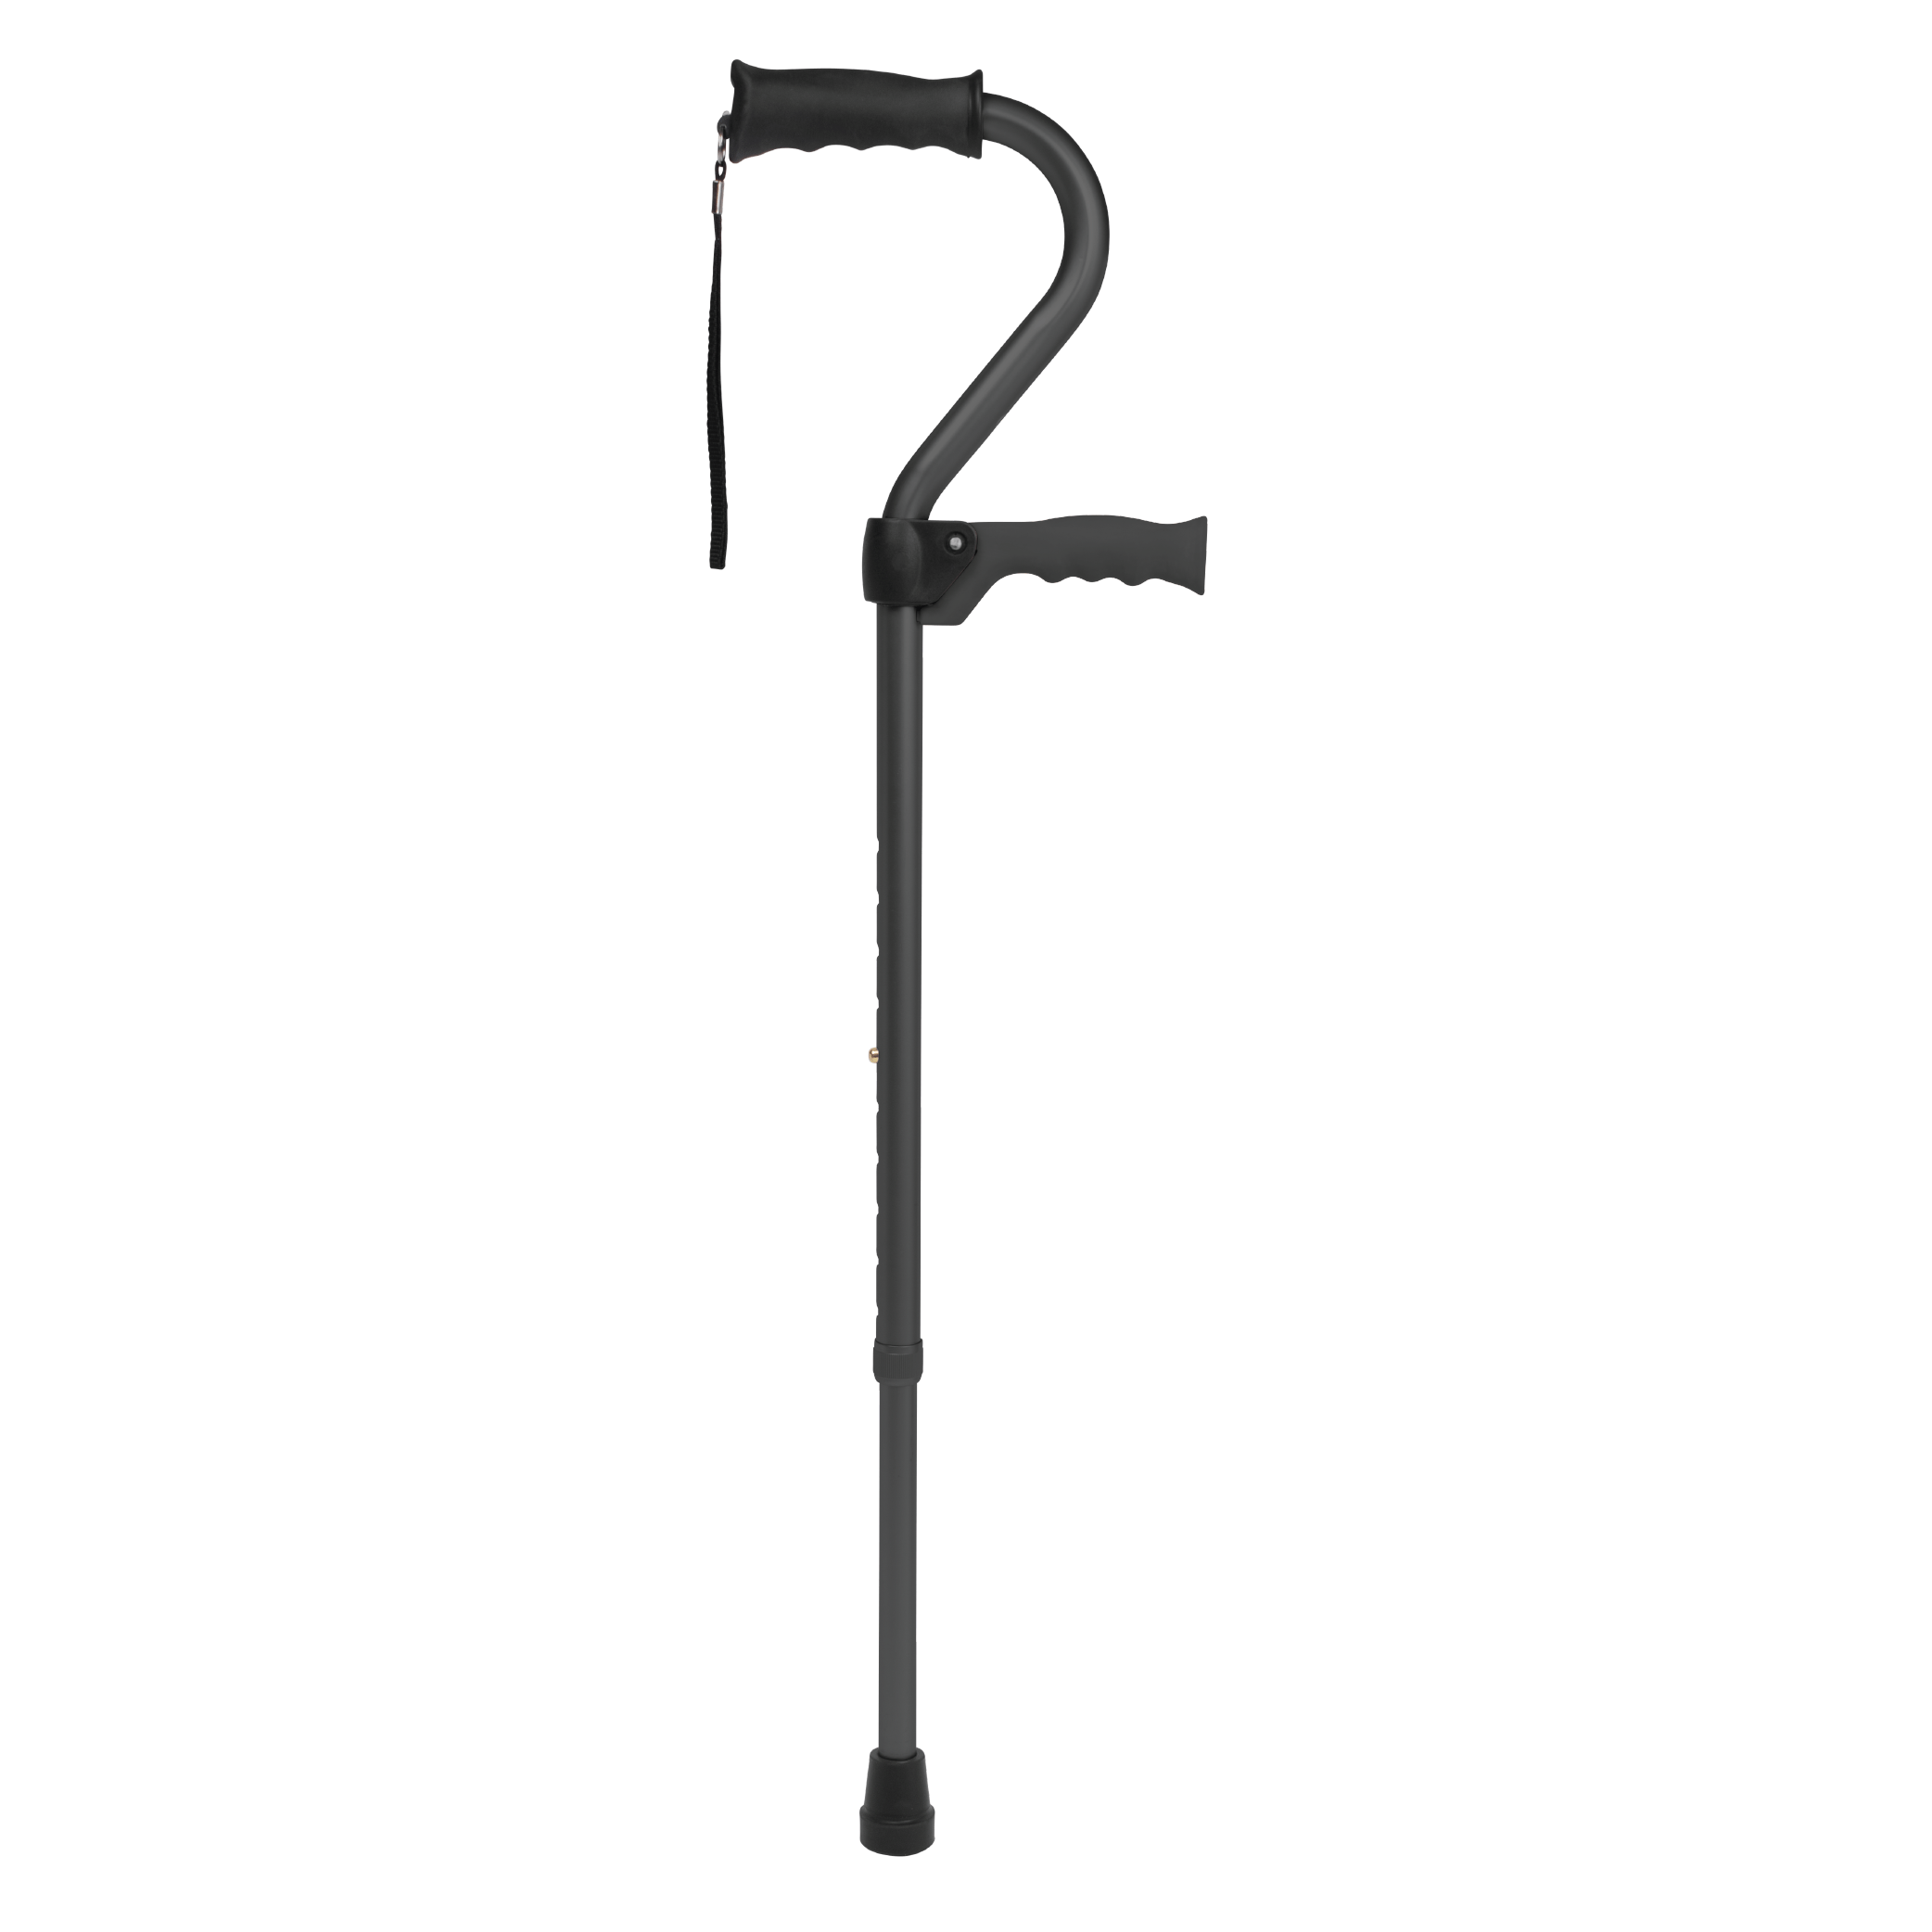 Folding Cane Holder/Clip from Essential Aids